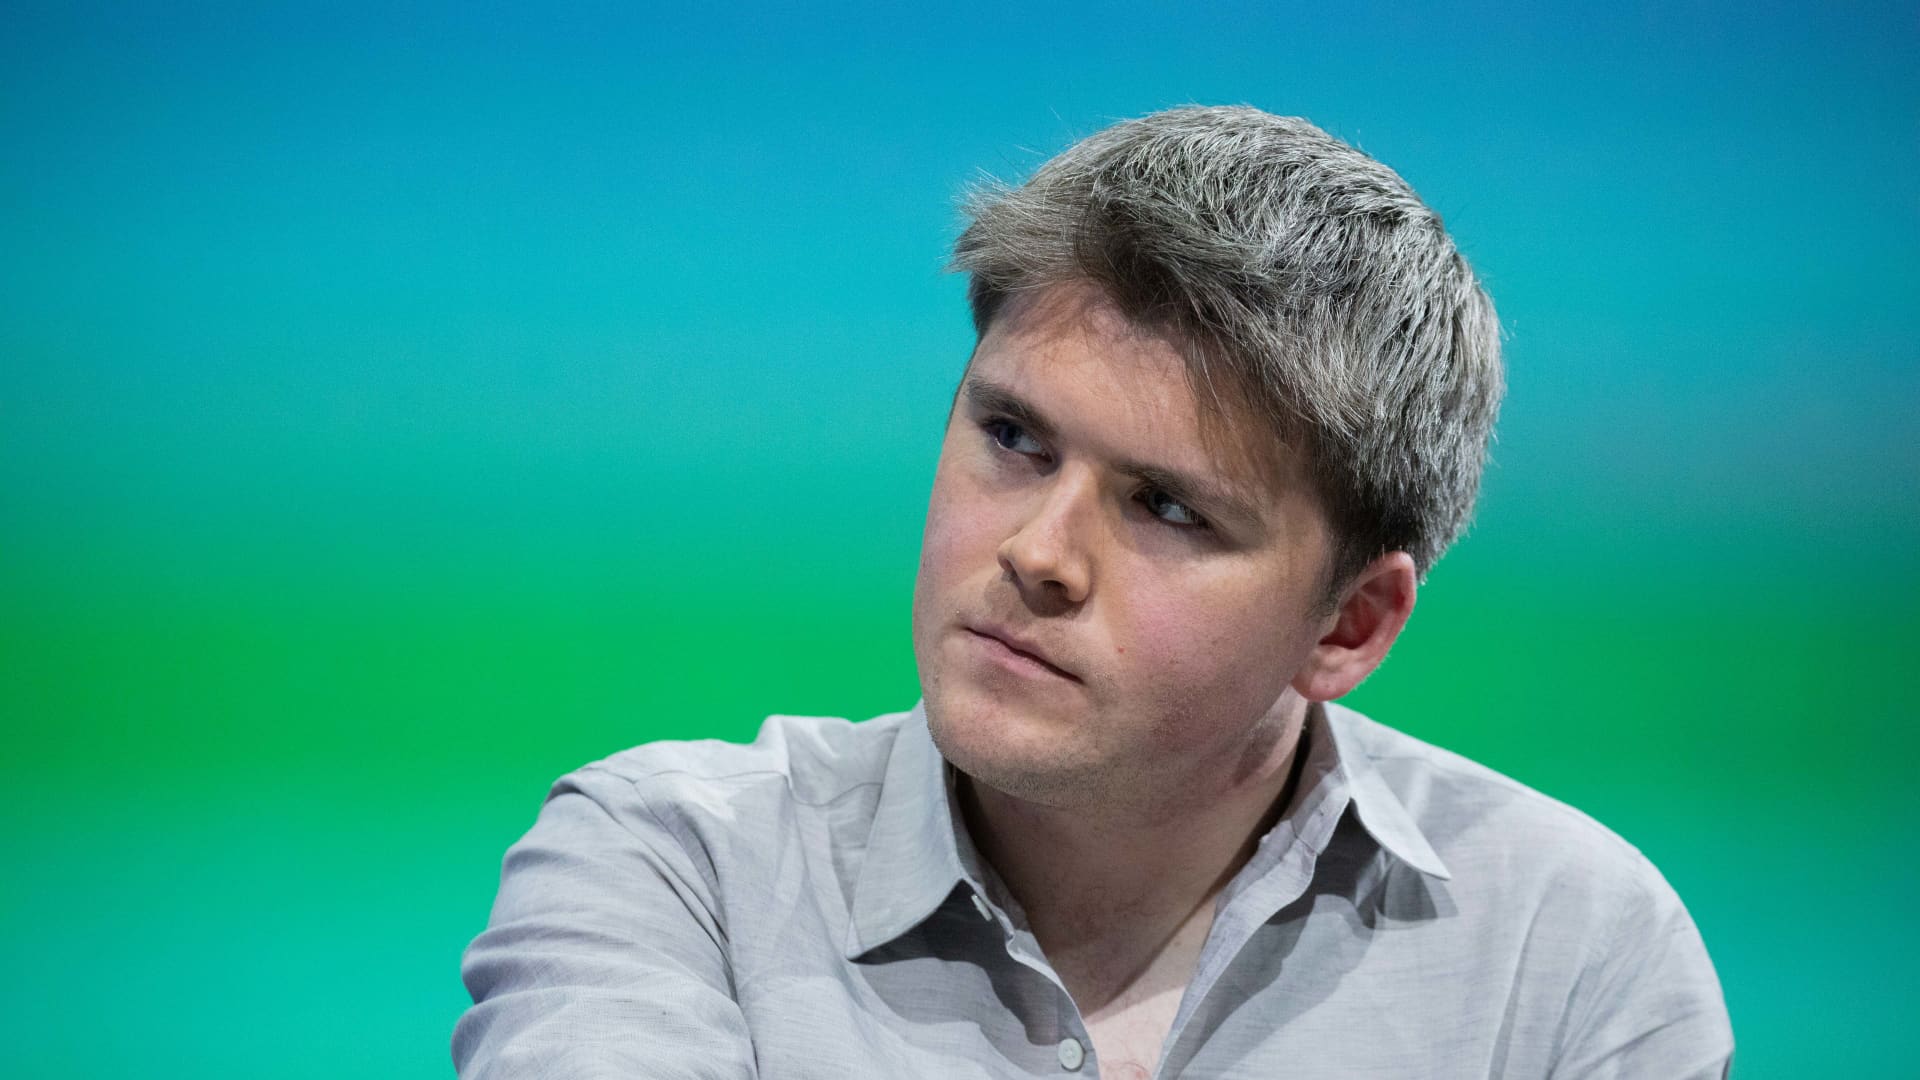 Stripe co-founder says high interest rates wiped out 'wackiest' ideas